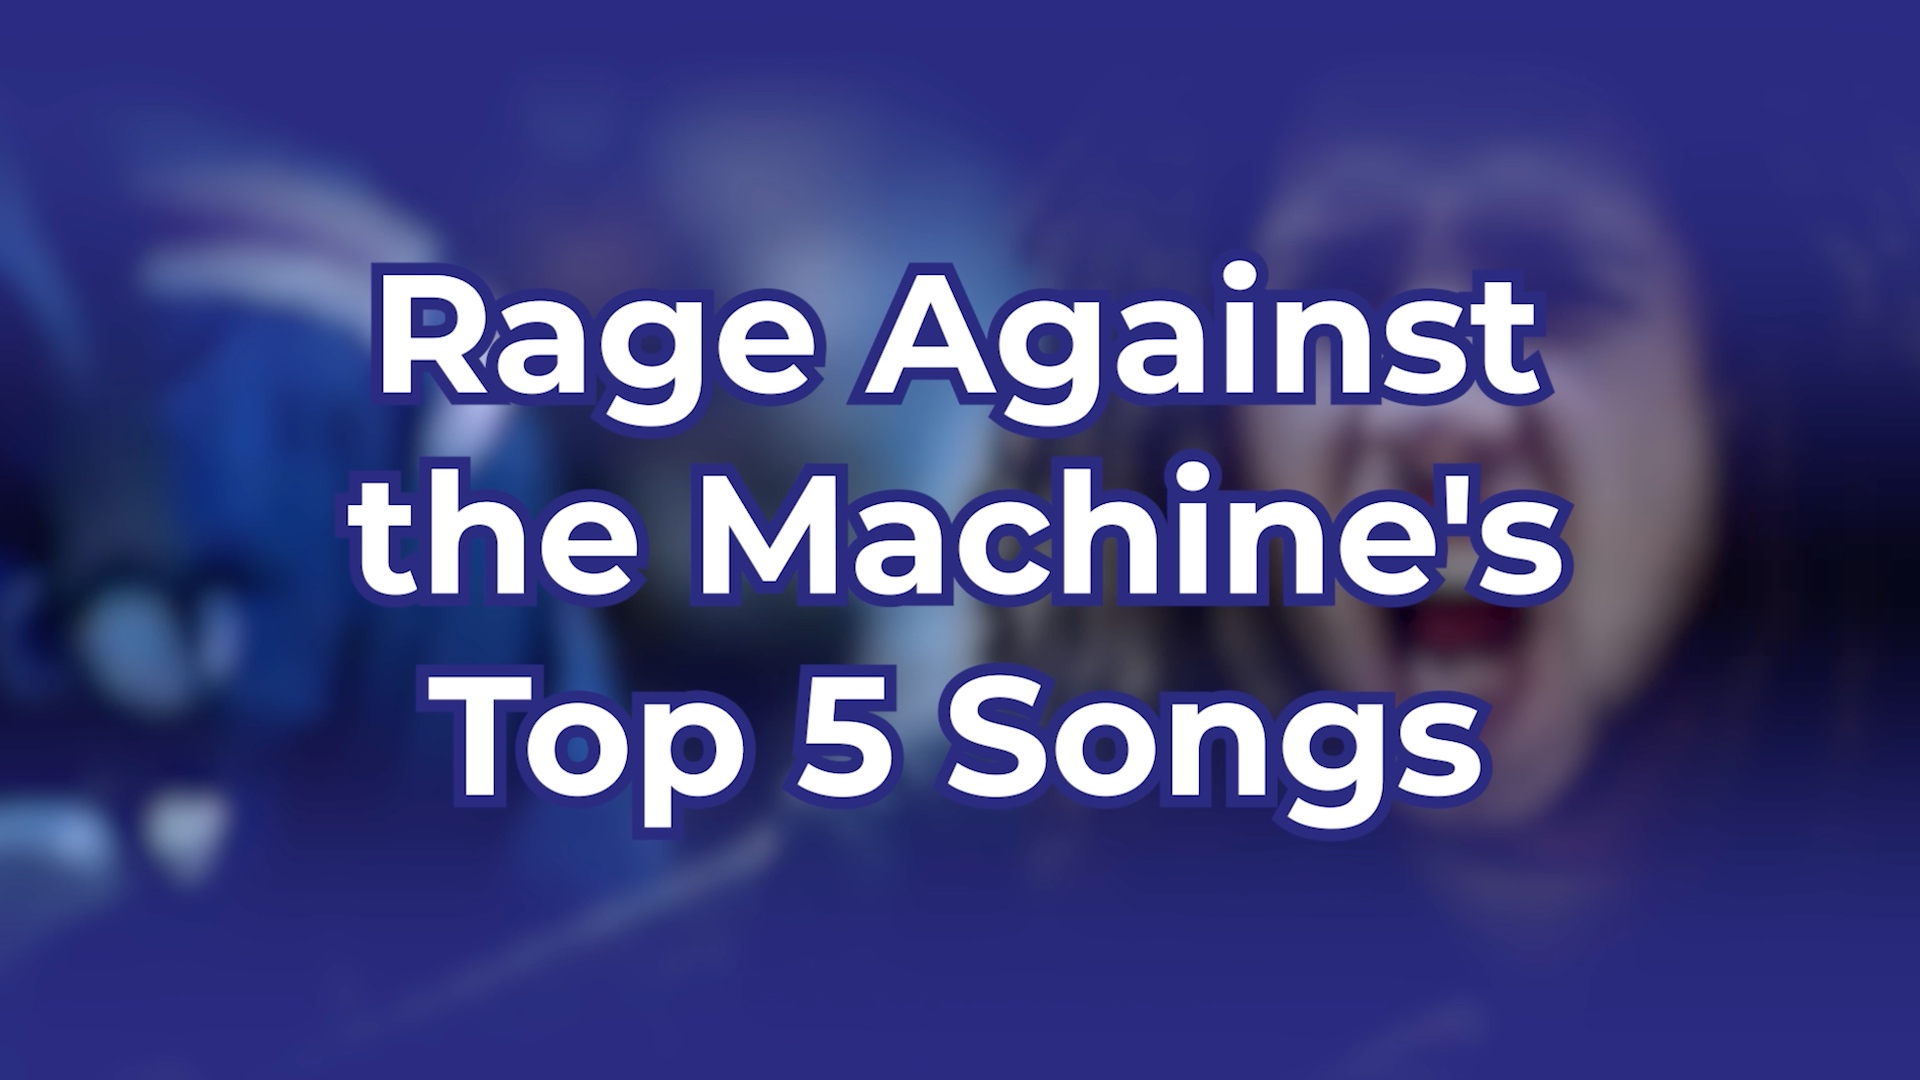 Rage Against the Machine's Top 5 Songs